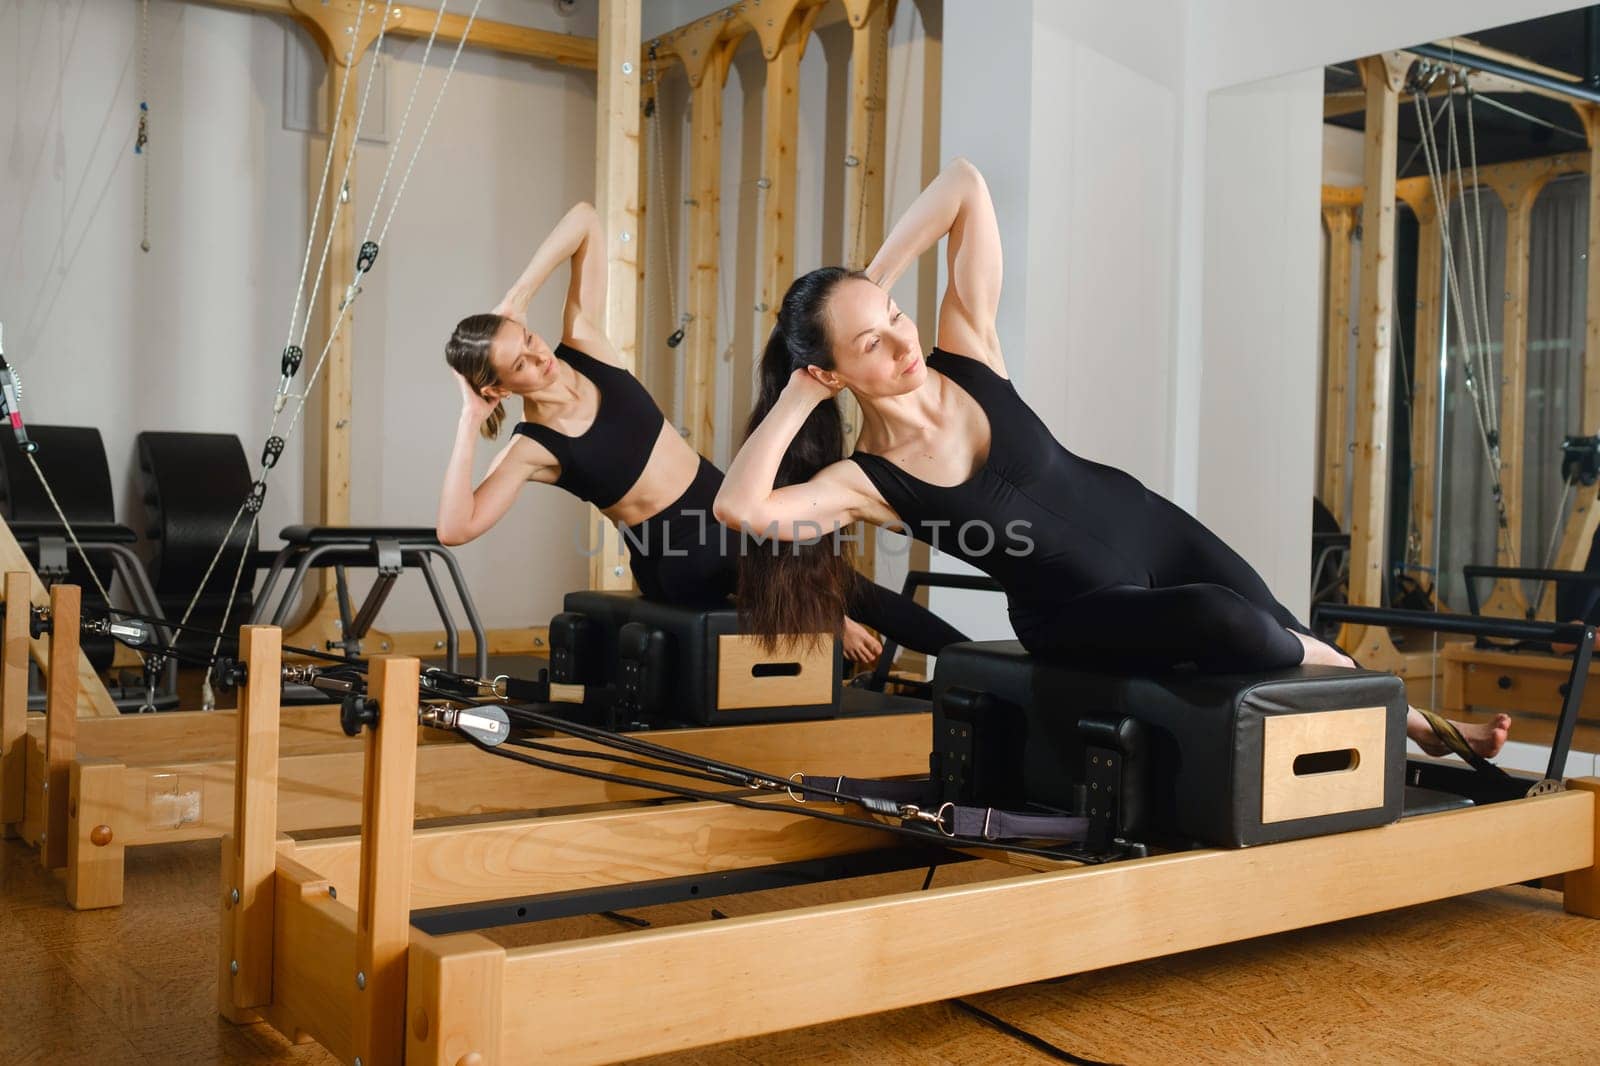 Two women balance on a pilates reformer machine in the gym by Lobachad